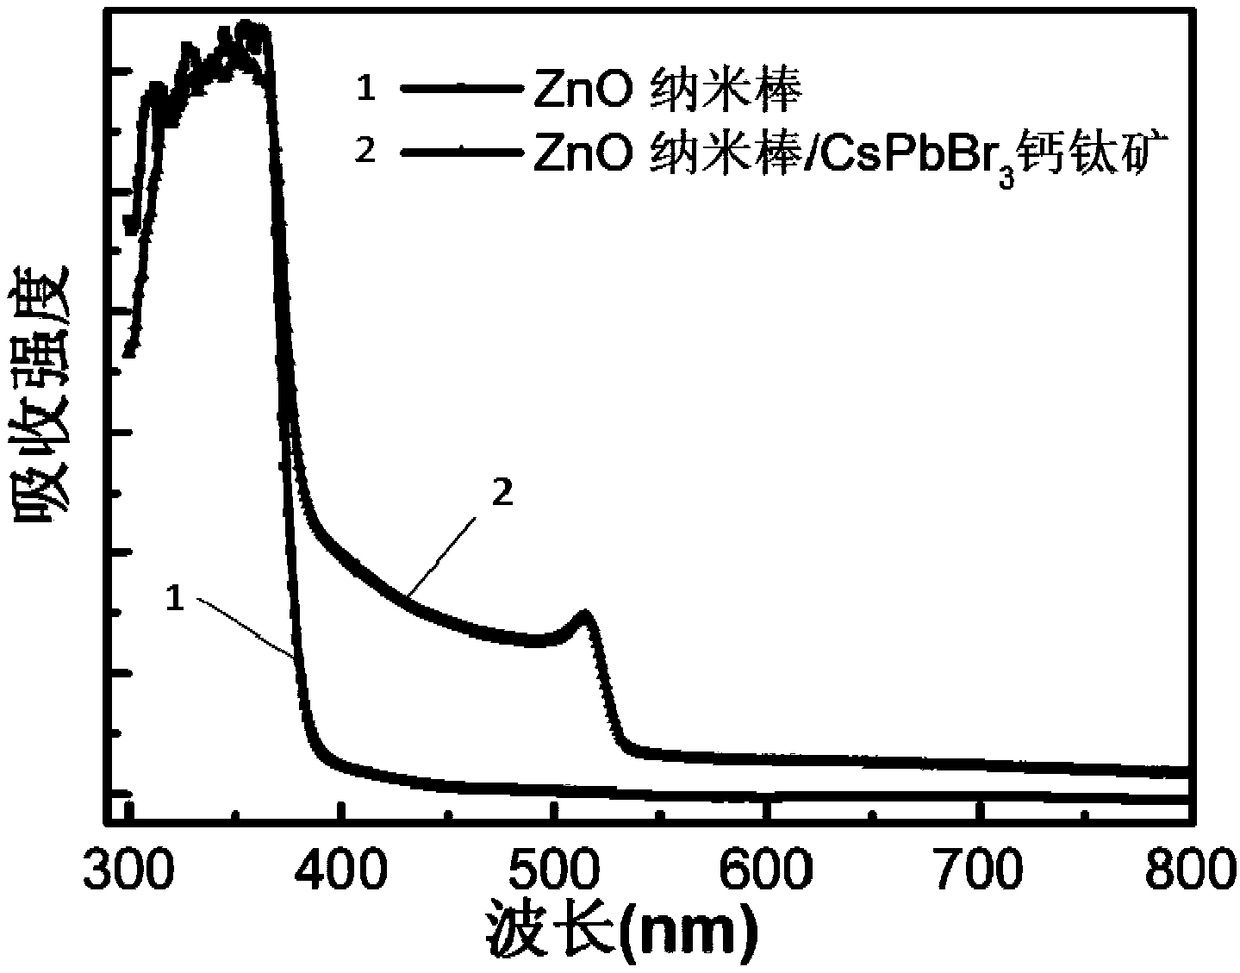 A purely inorganic photodetector based on the zno/cspbbr3/moo3 structure